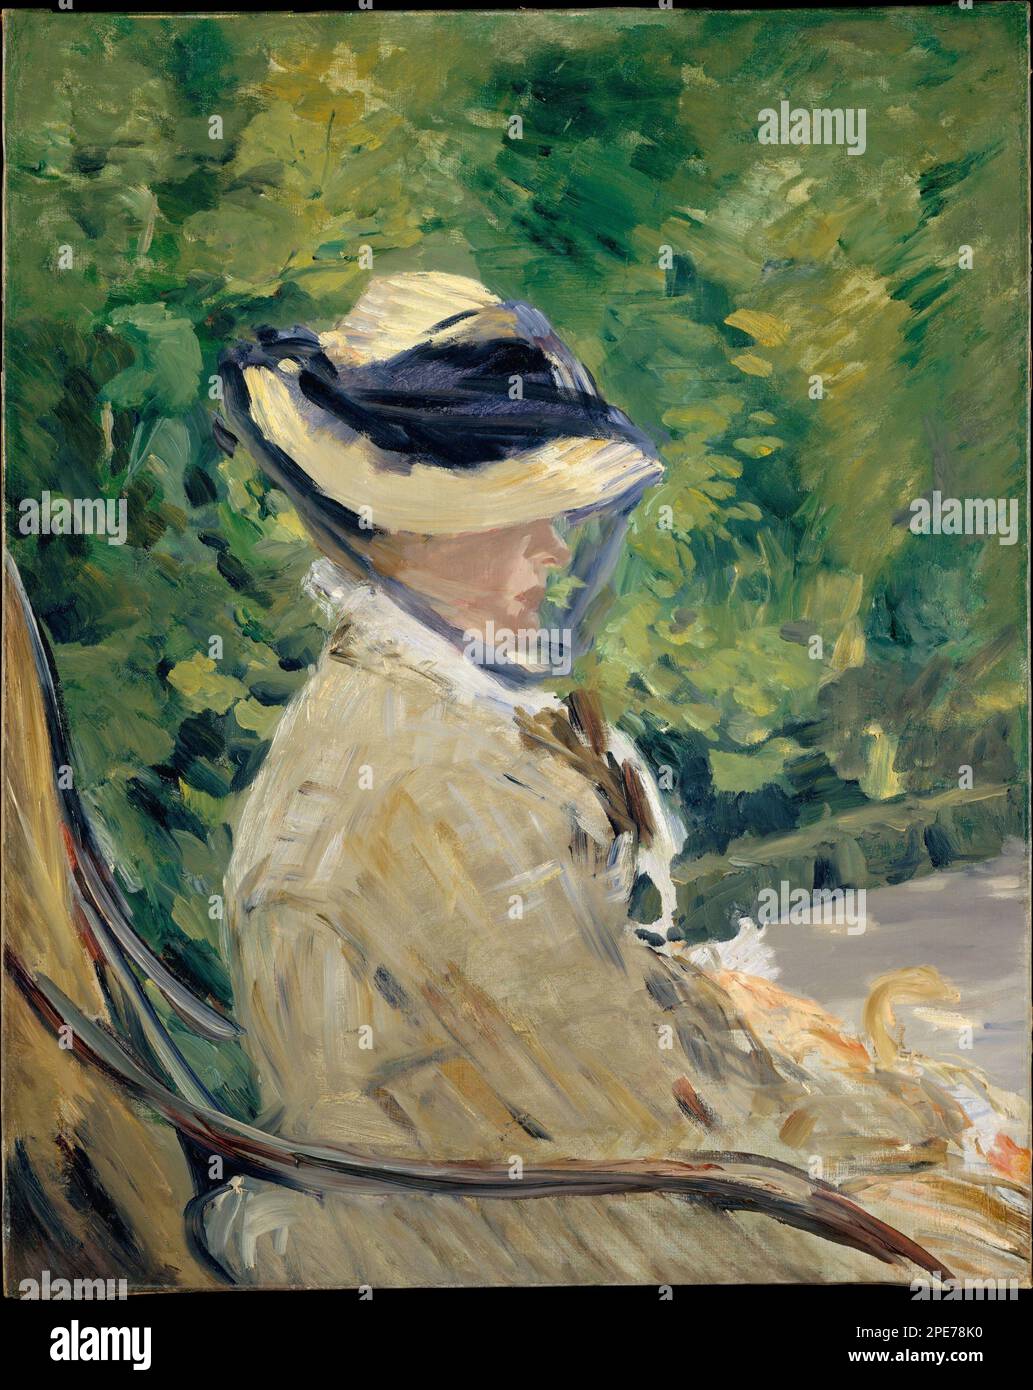 Madame Manet (Suzanne Leenhoff, 1830–1906) at Bellevue 1880 by Edouard Manet Stock Photo